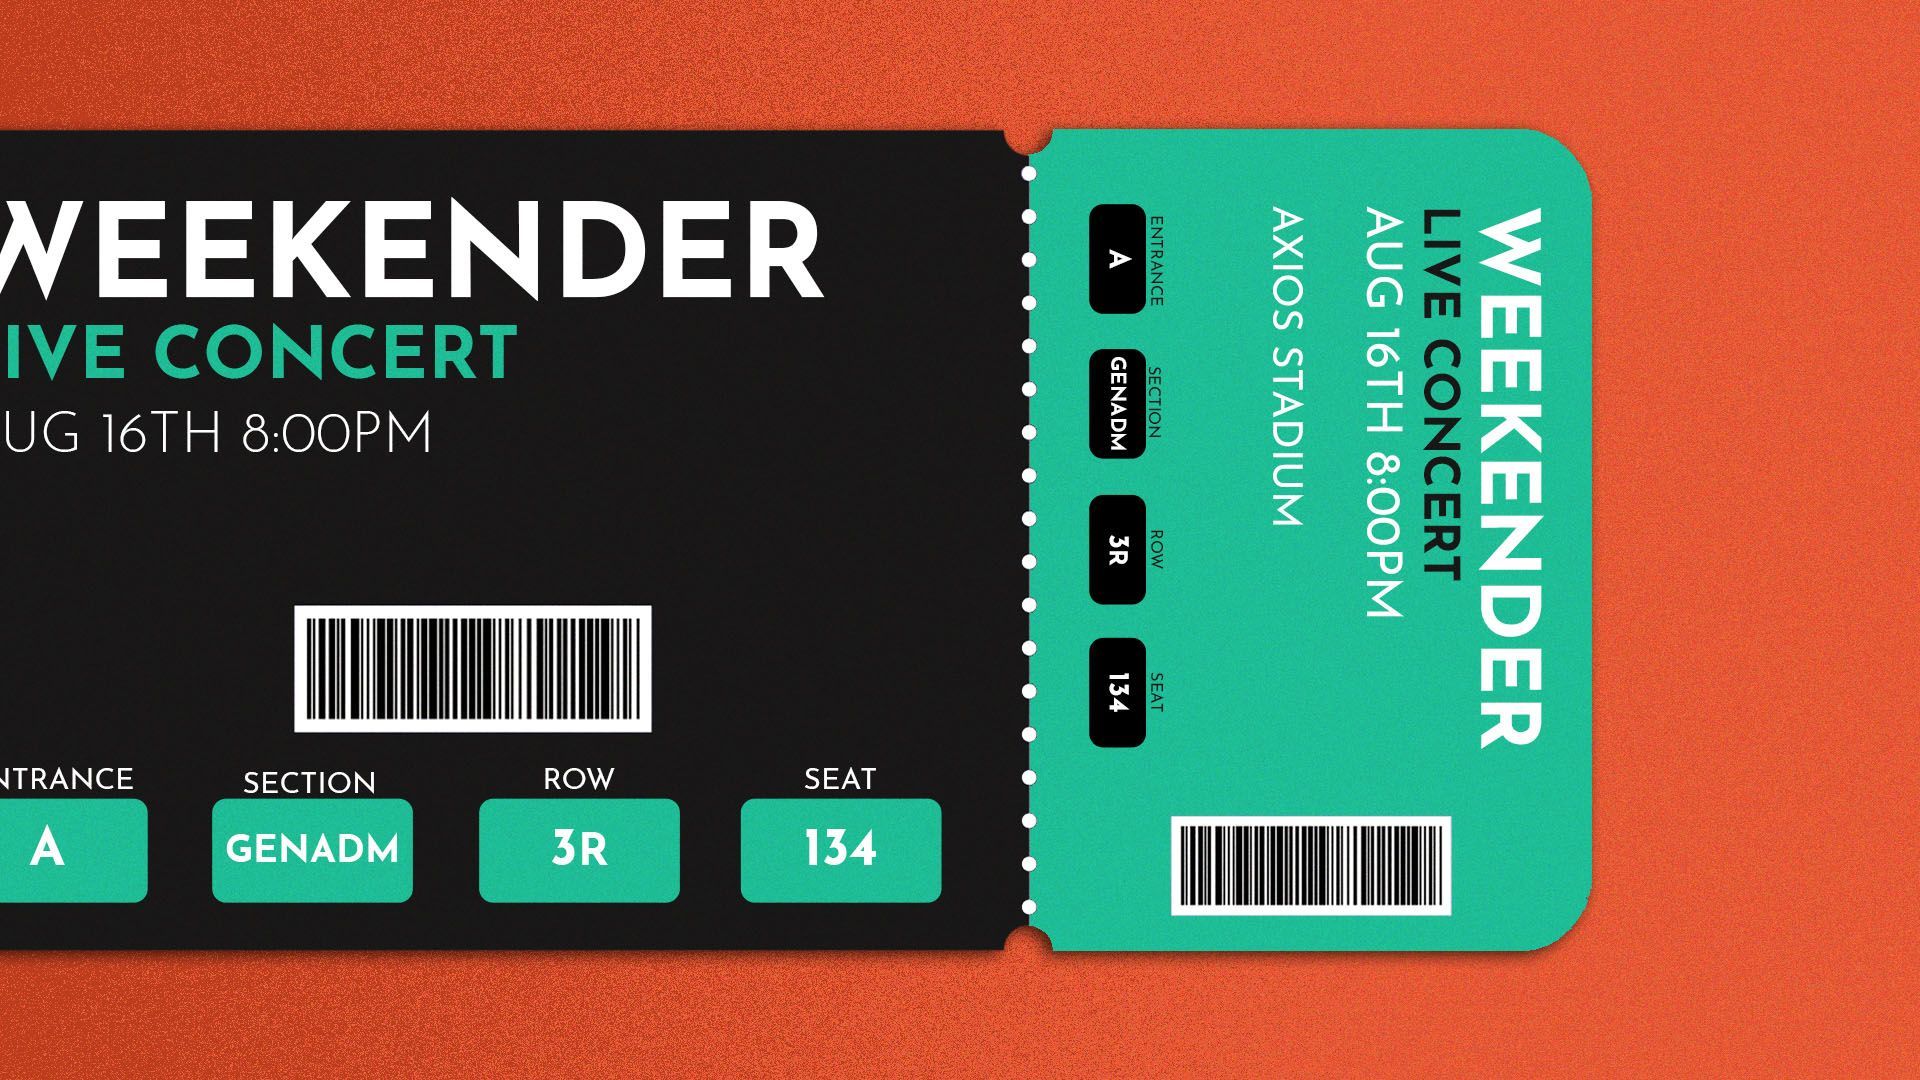 Illustration of a concert ticket with "Weekender" written on it.